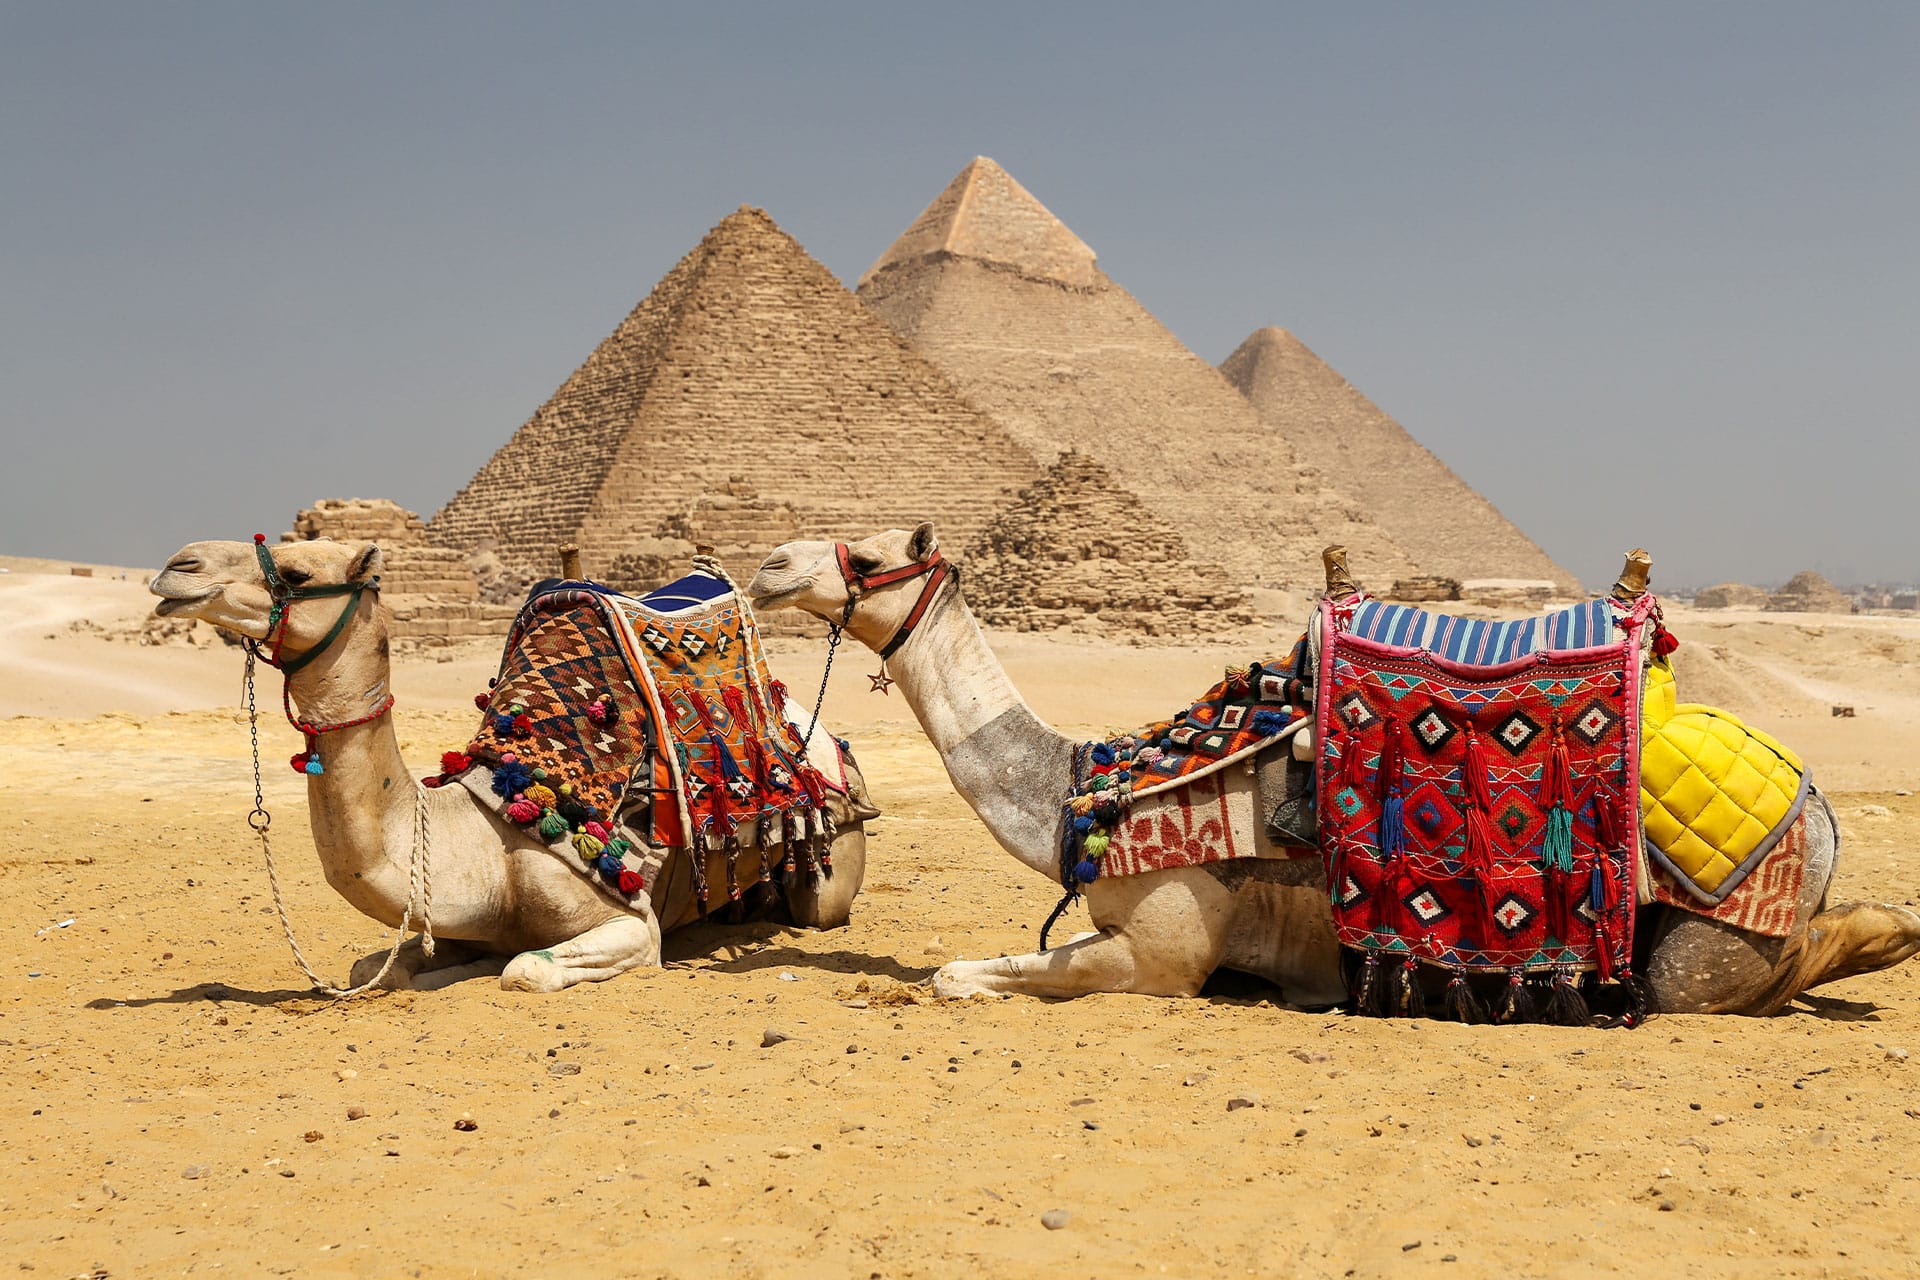 Two camels lying down with the pyramids of Giza in the background – one of the top attractions in Egypt.